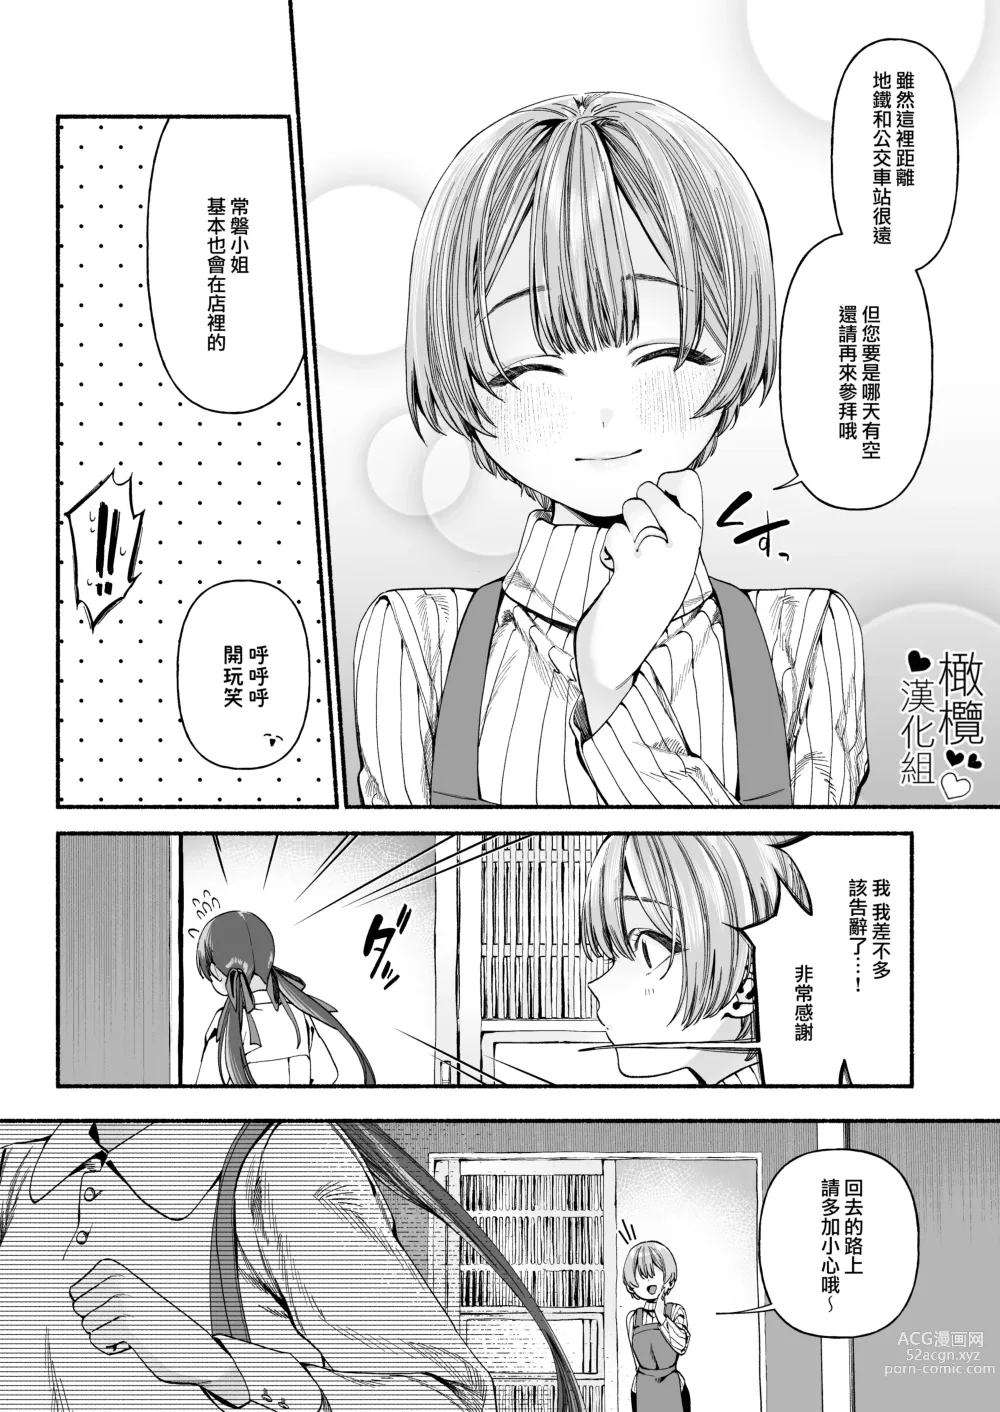 Page 6 of doujinshi 因報春鳥已死